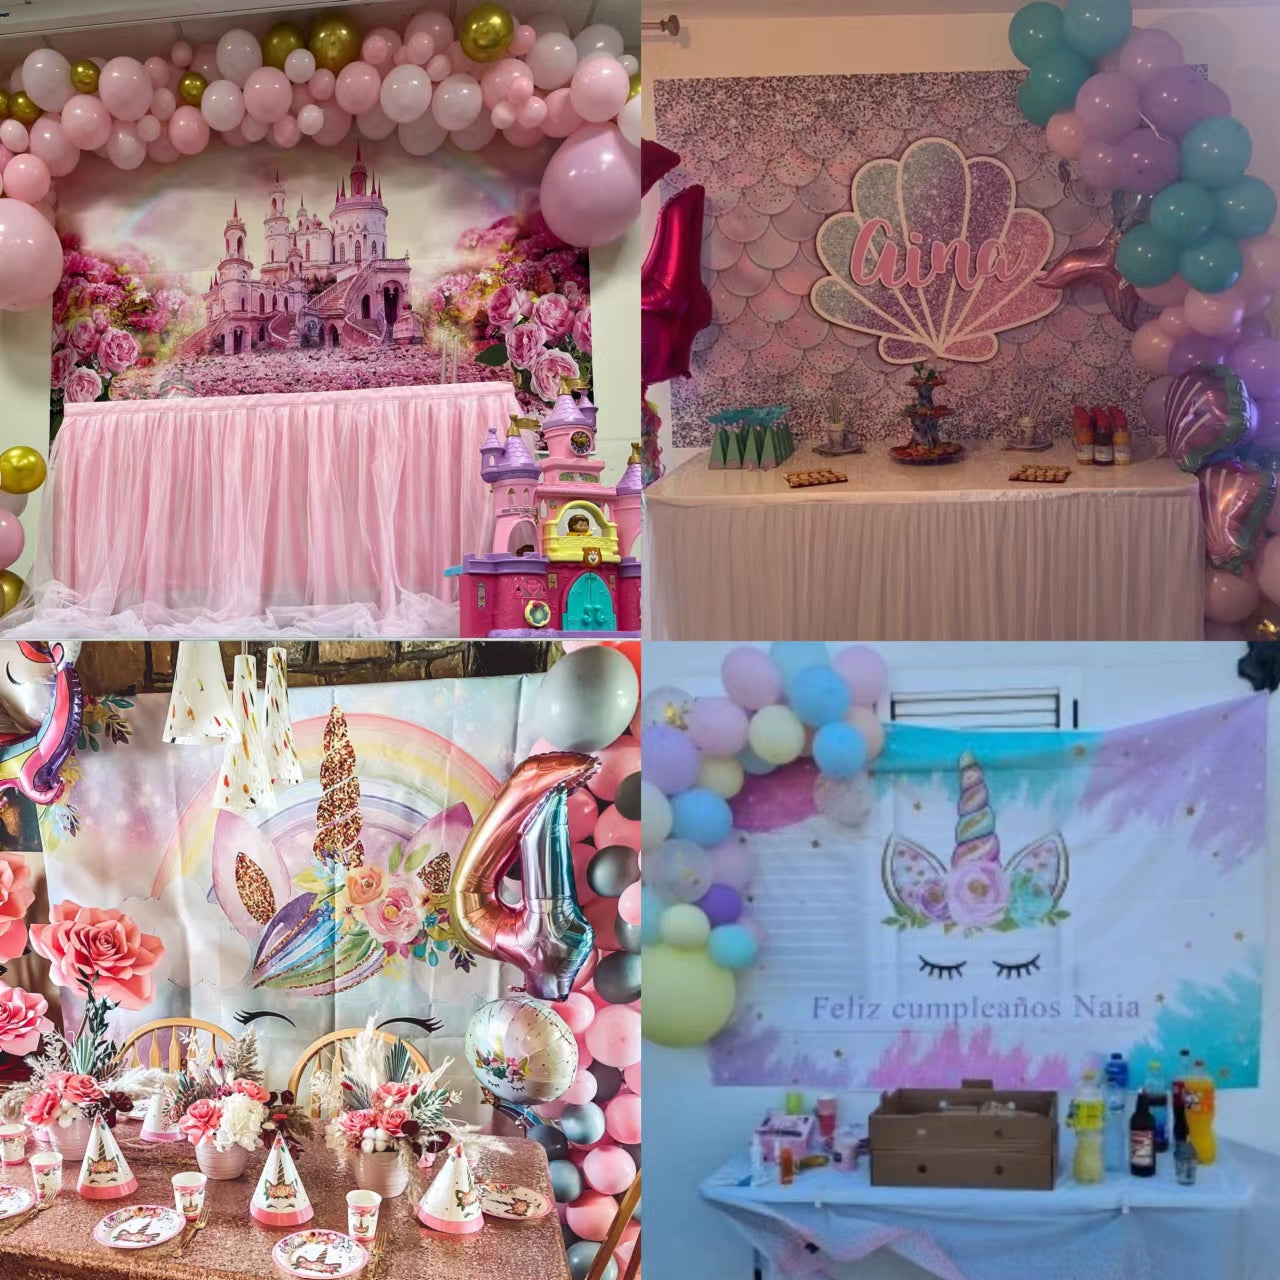 Princess Baby Shower Birthday Party Backdrop Banner